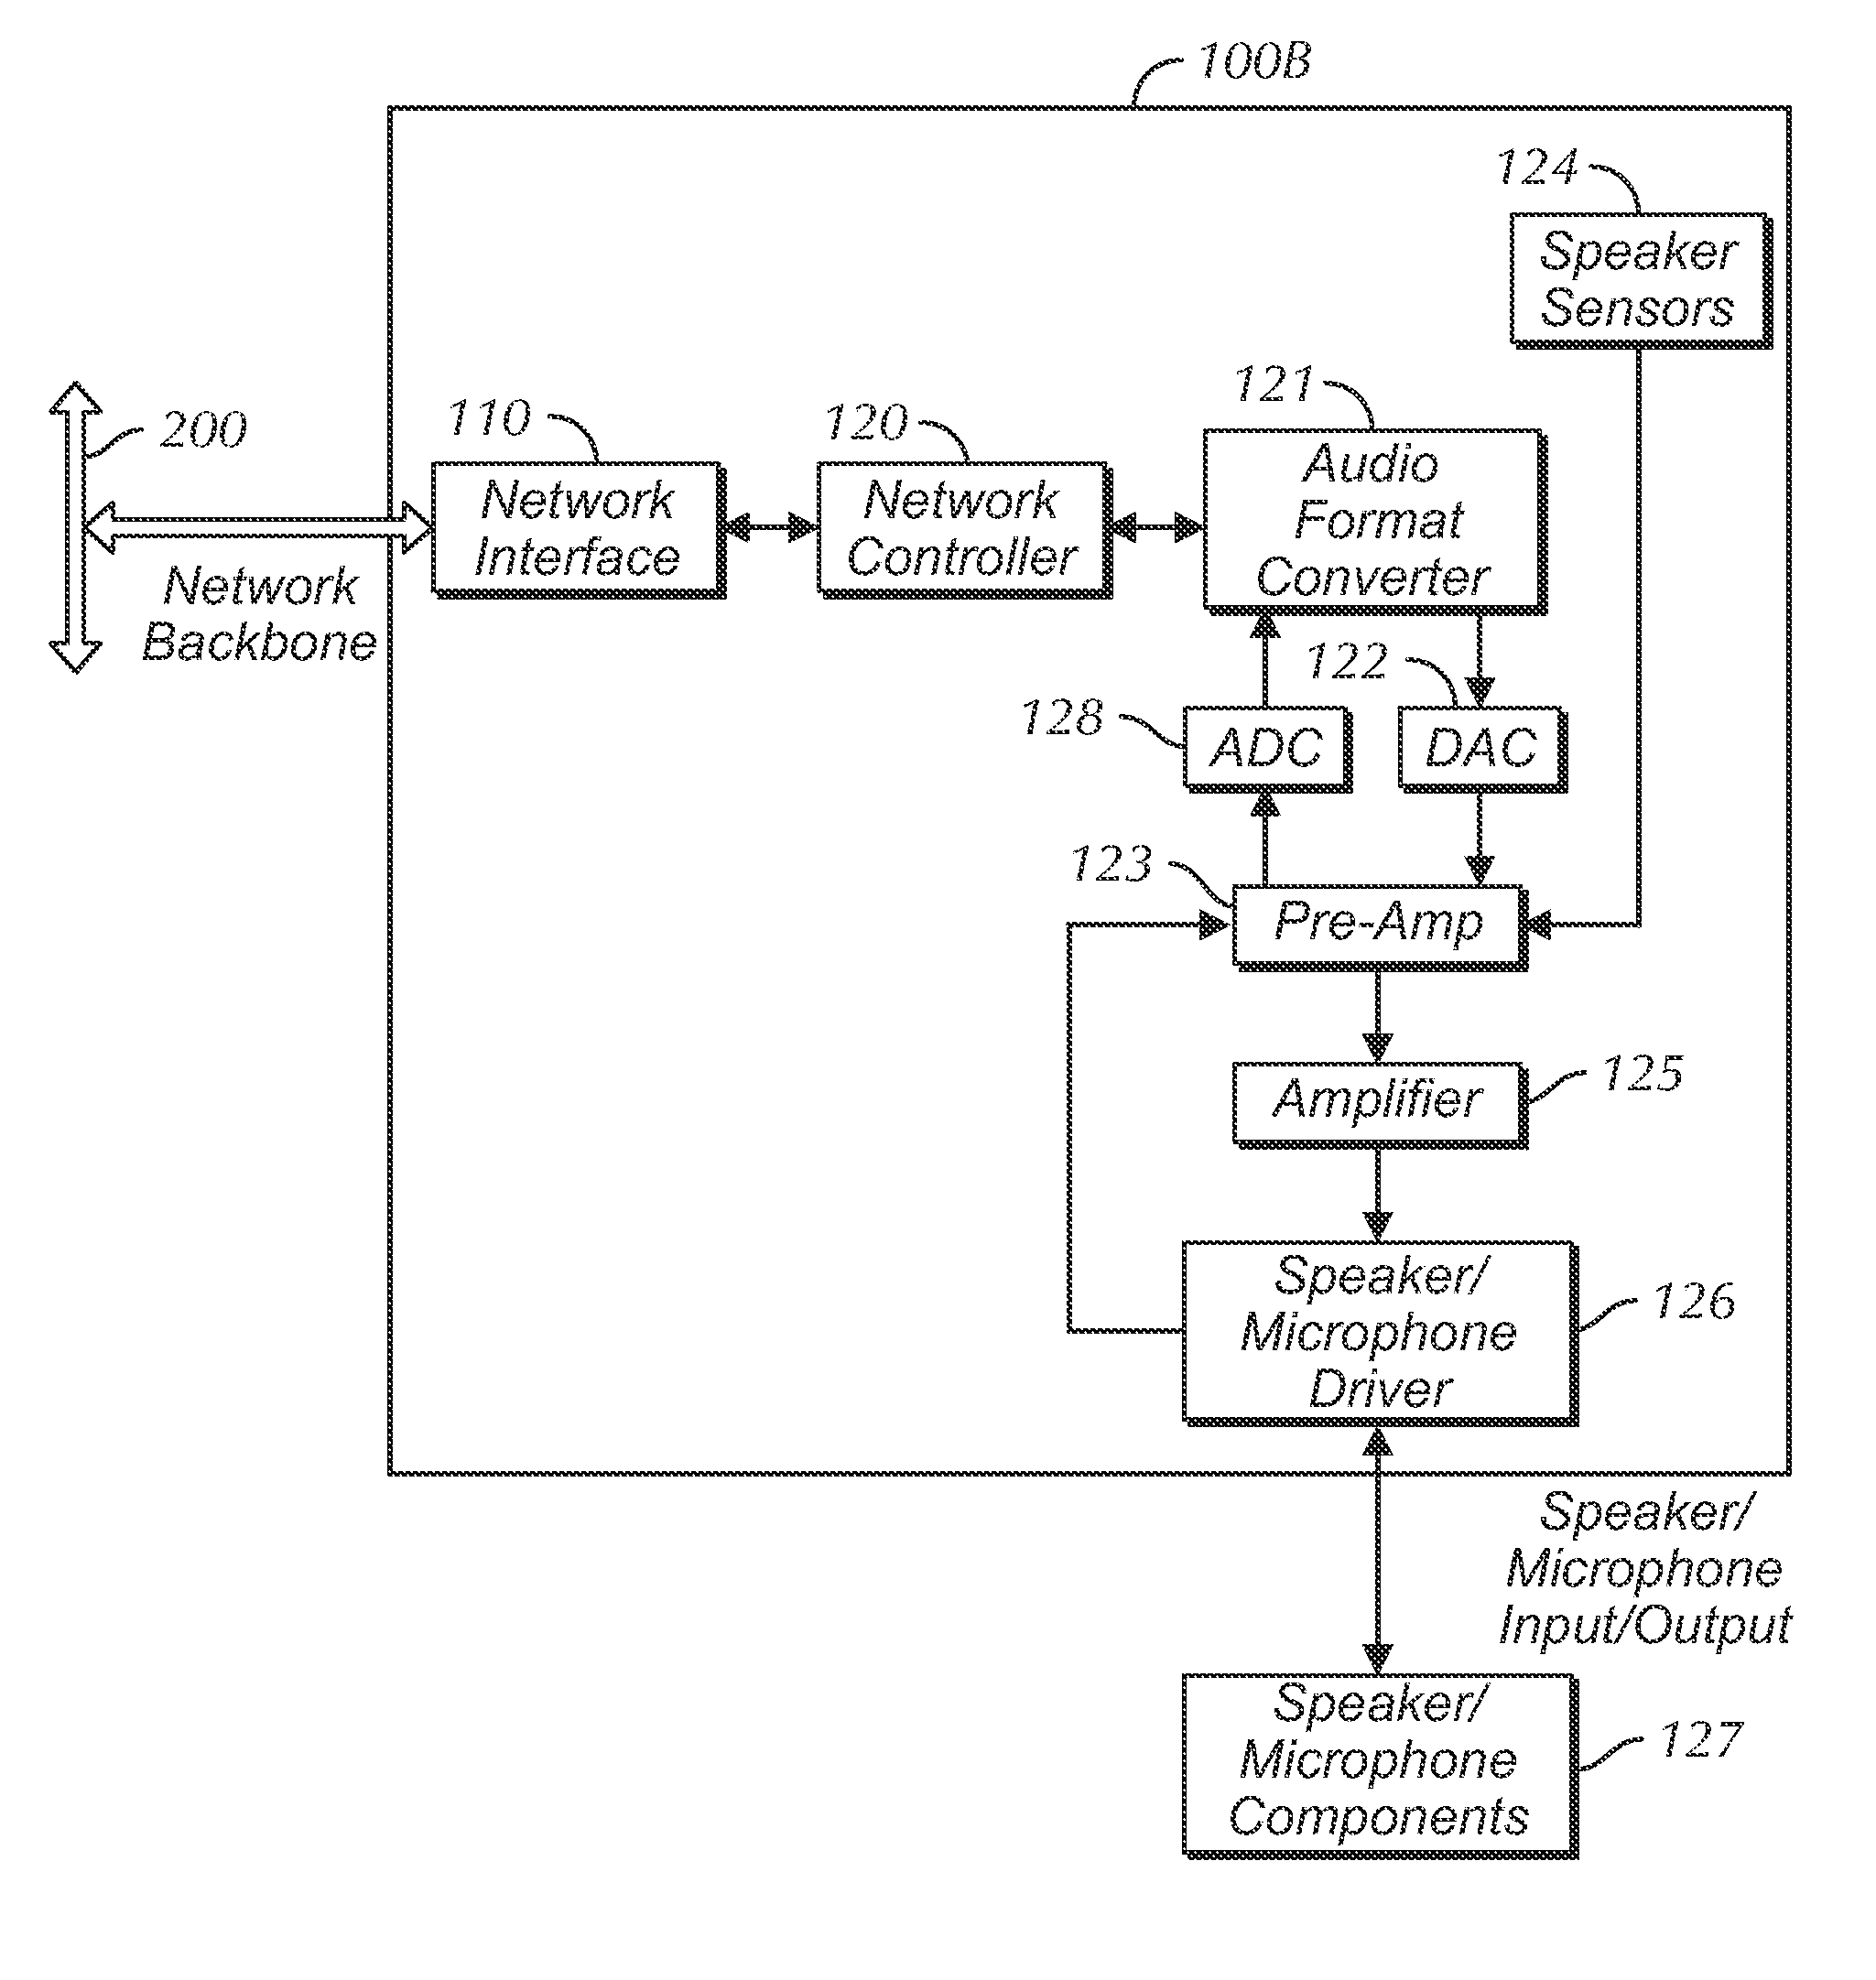 Legacy Audio Converter/Controller for an Audio Network Distribution System